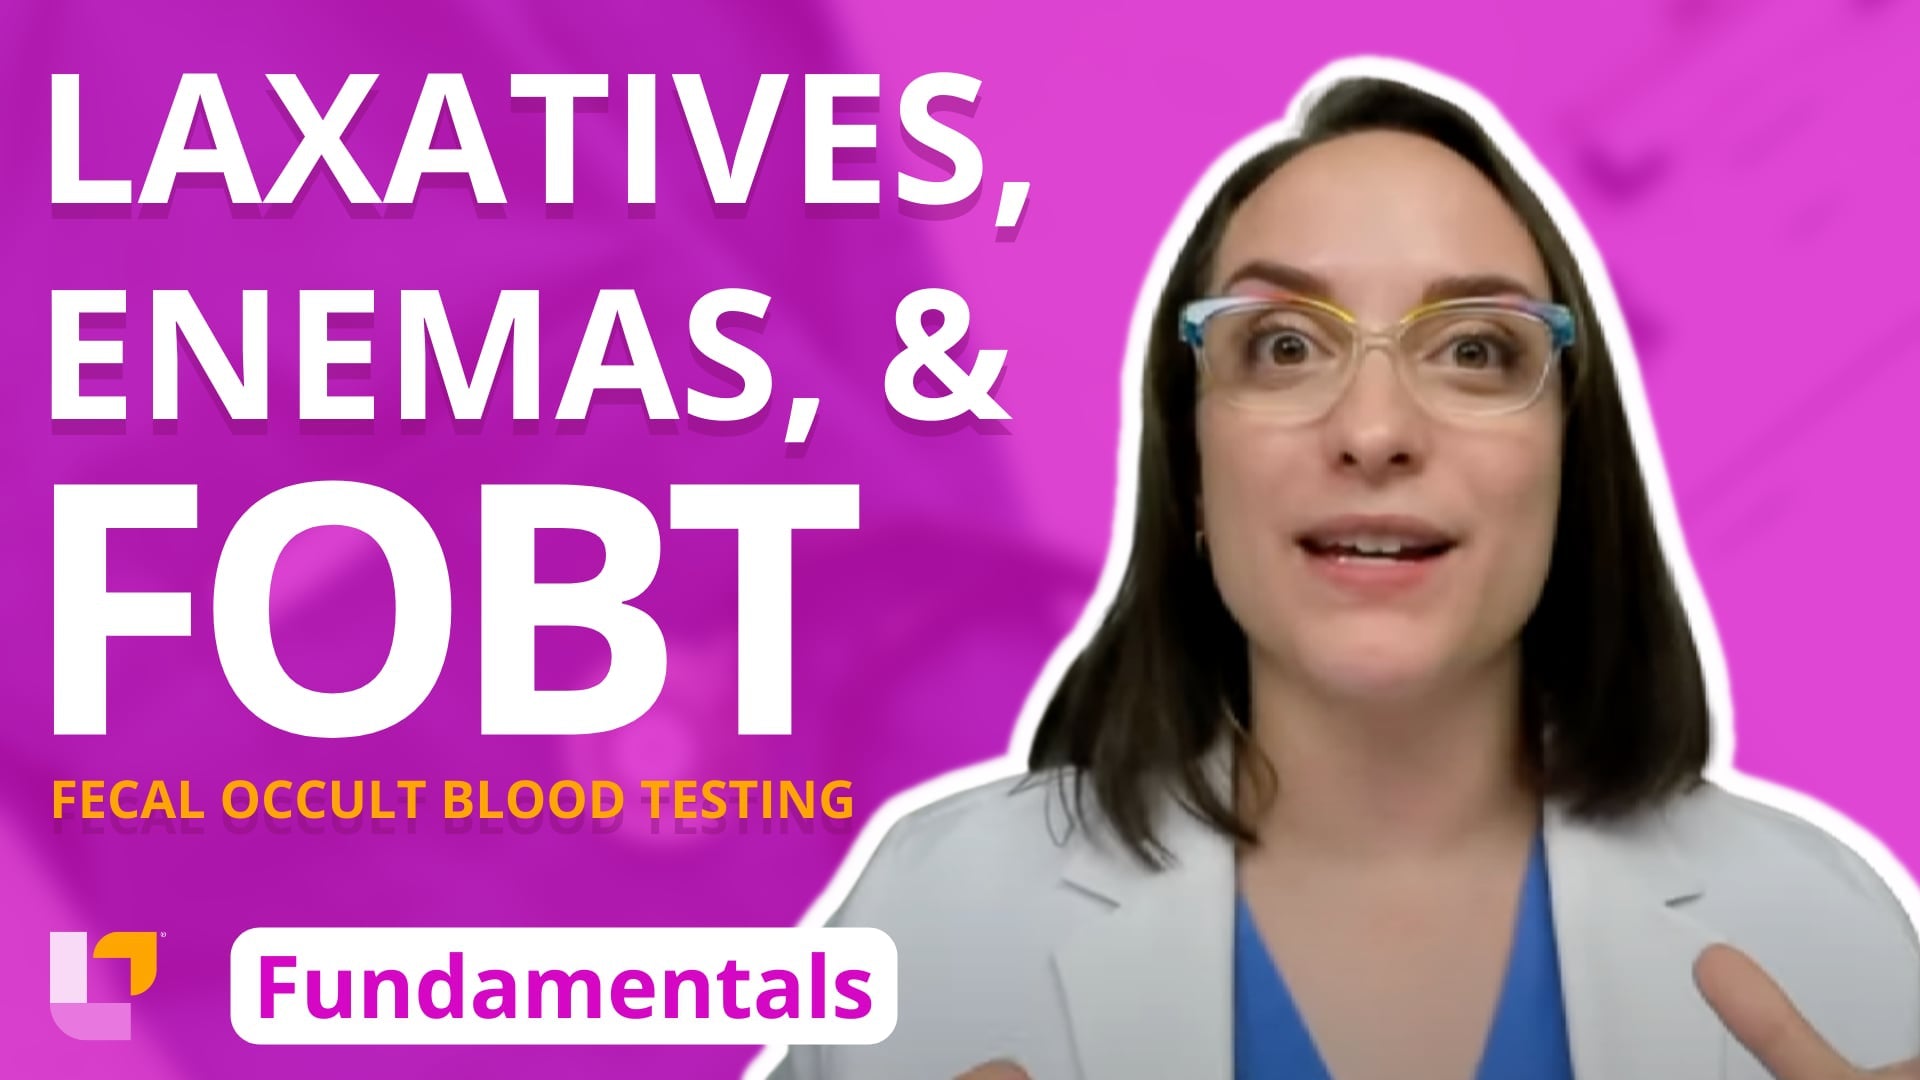 Fundamentals - Practice & Skills, part 25: Laxatives, Enemas, and Fecal Occult Blood Testing - LevelUpRN